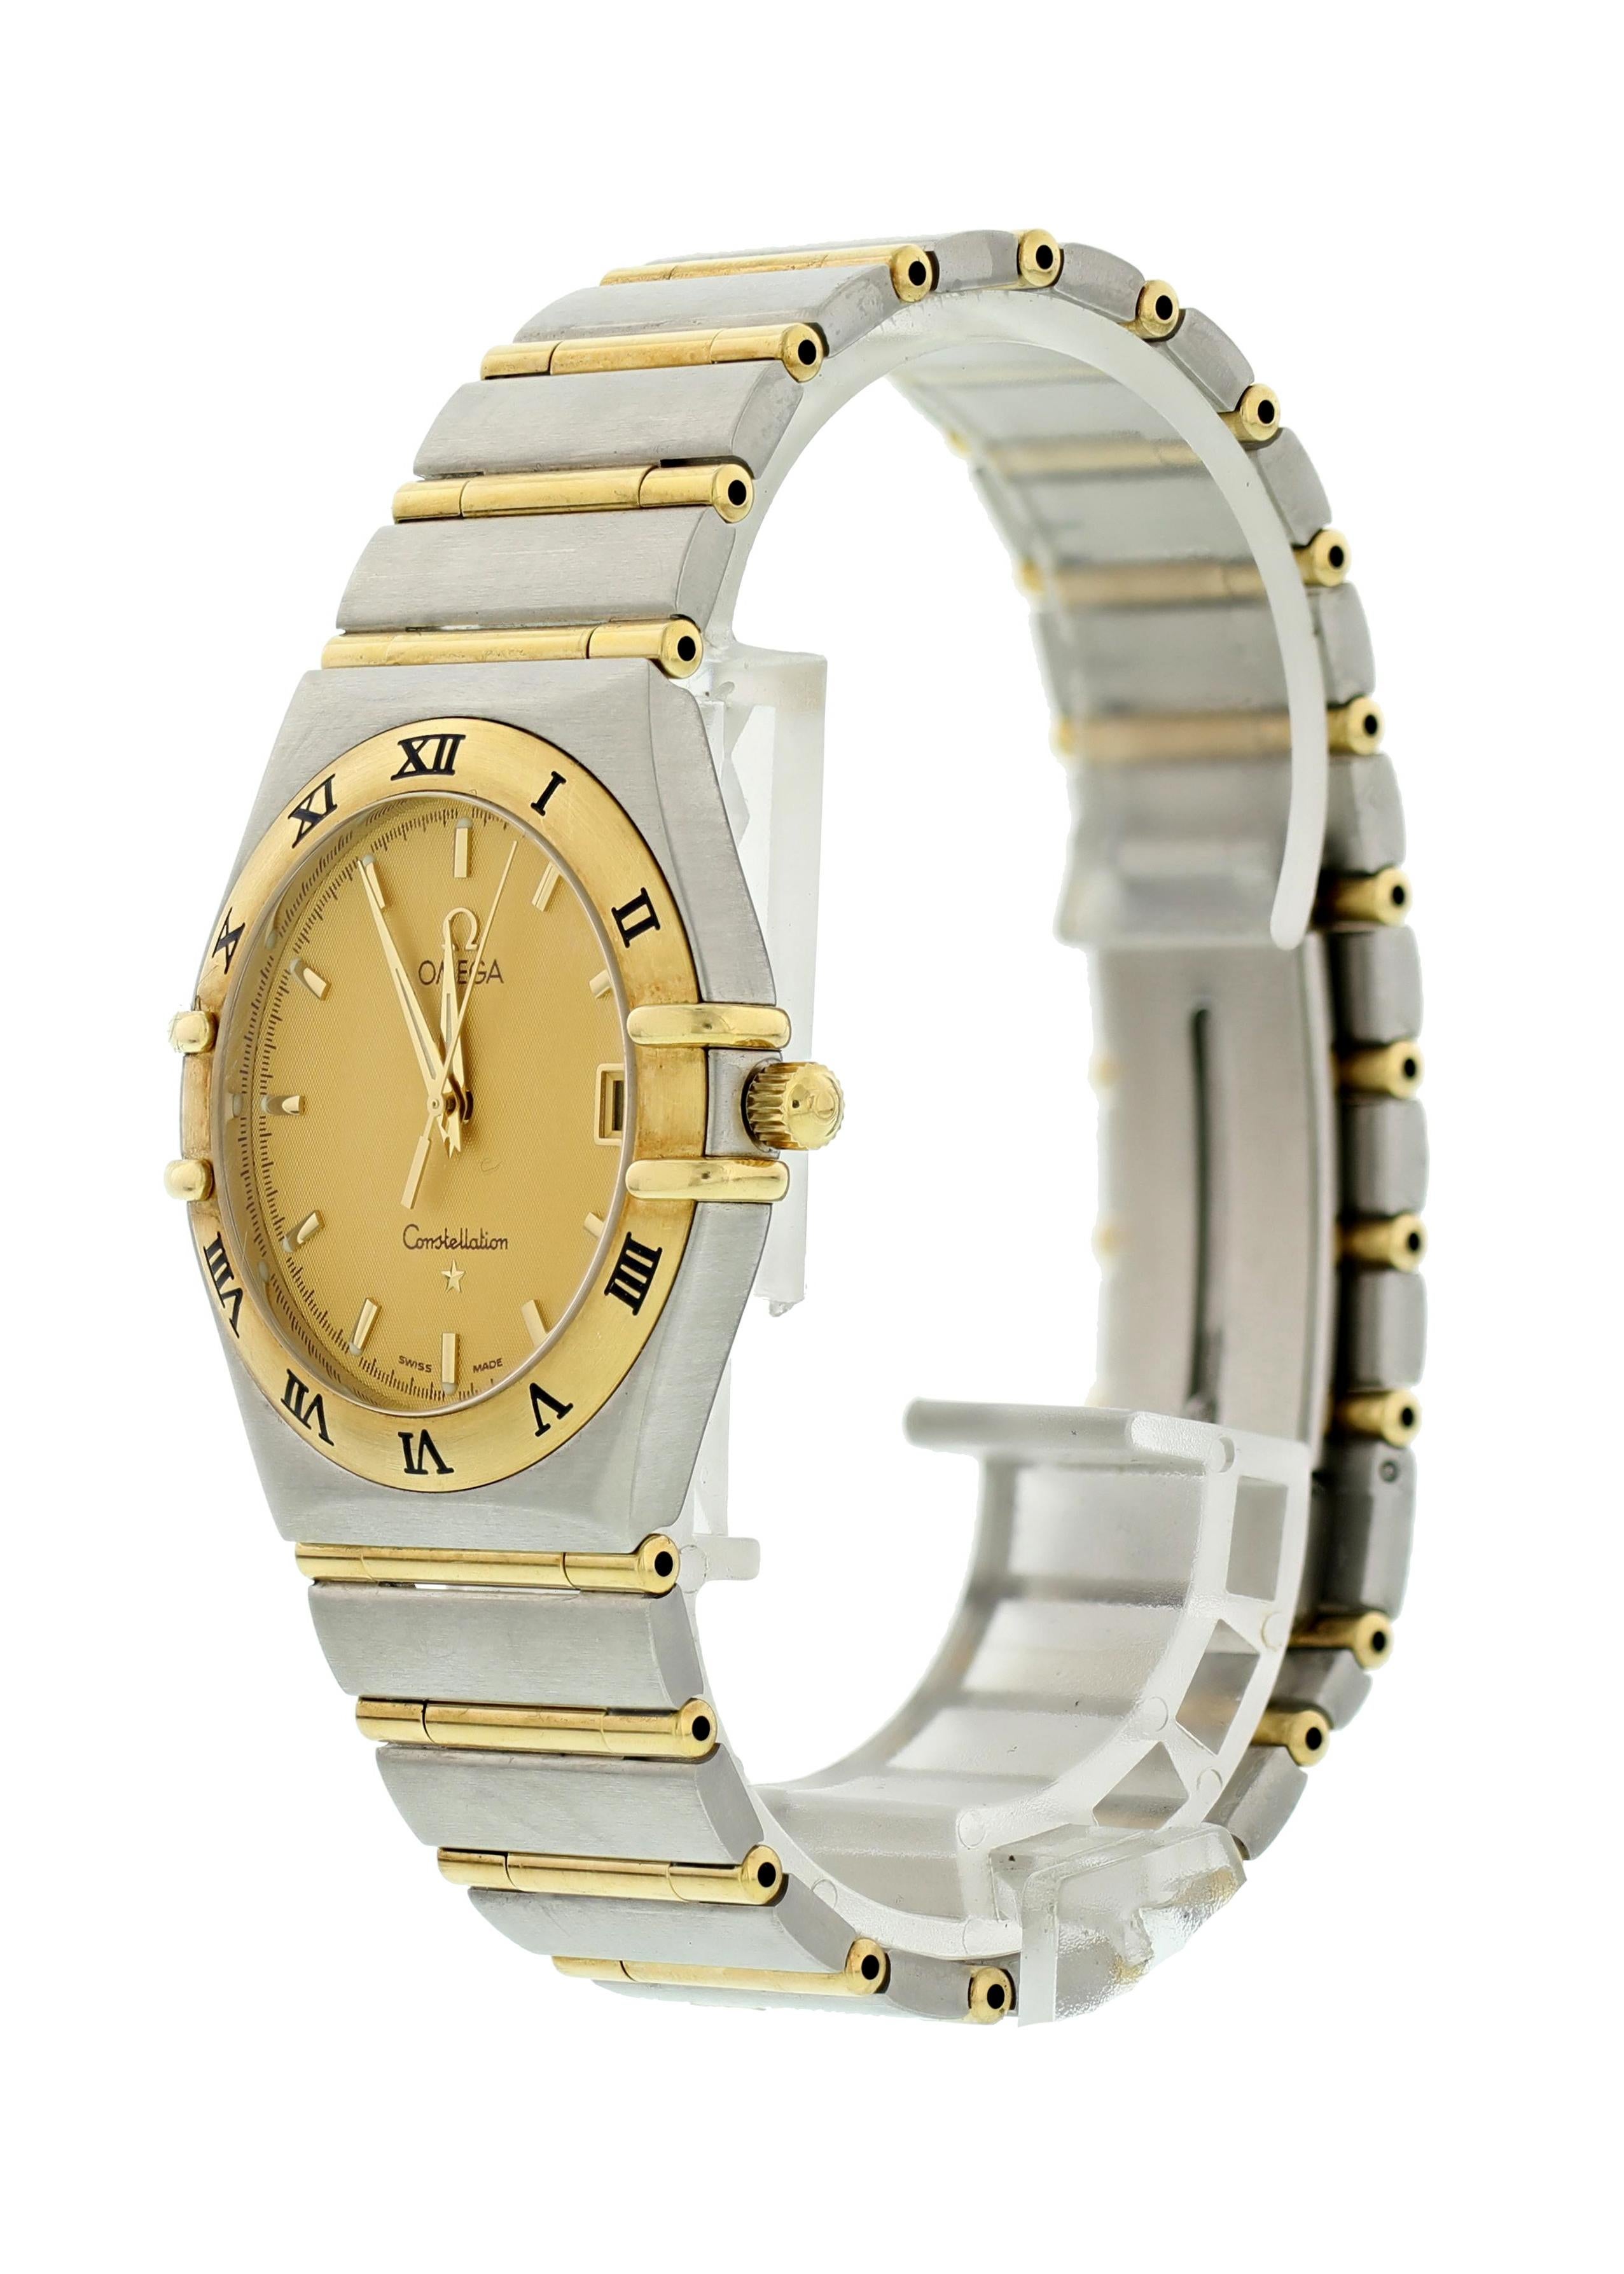 Omega Constellation 1212.10 Men's Watch. 33.5mm stainless steel case 18K Gold bezel with Black Roman numerals.Champagne dial gold luminous hands and gold hour markers. Minute markers around the outer dial. Date display at 3 o'clock position.